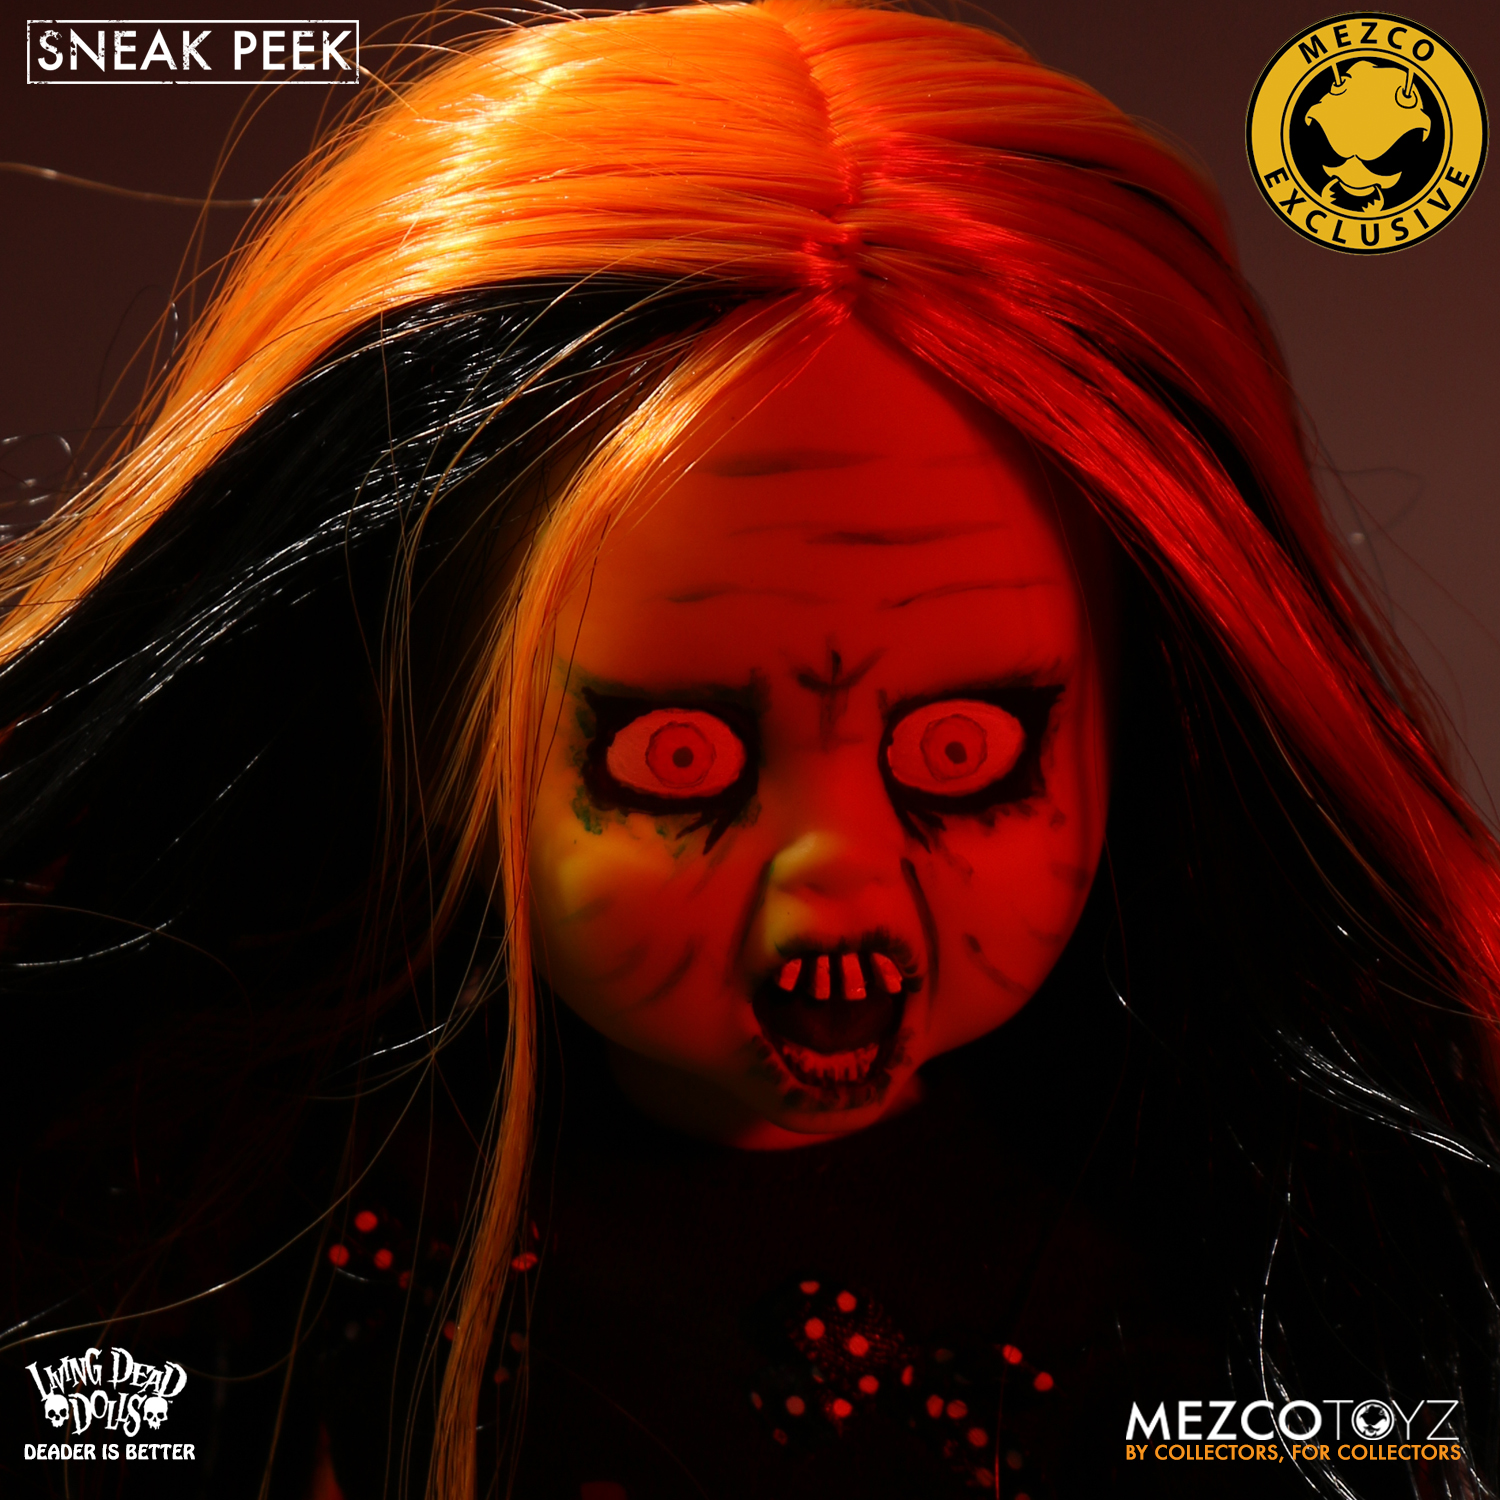 MEZCO ONLY 666 MADE LIVING DEAD DOLLS SWEET TOOTH HALLOWEEN 2017 B/W VARIANT 